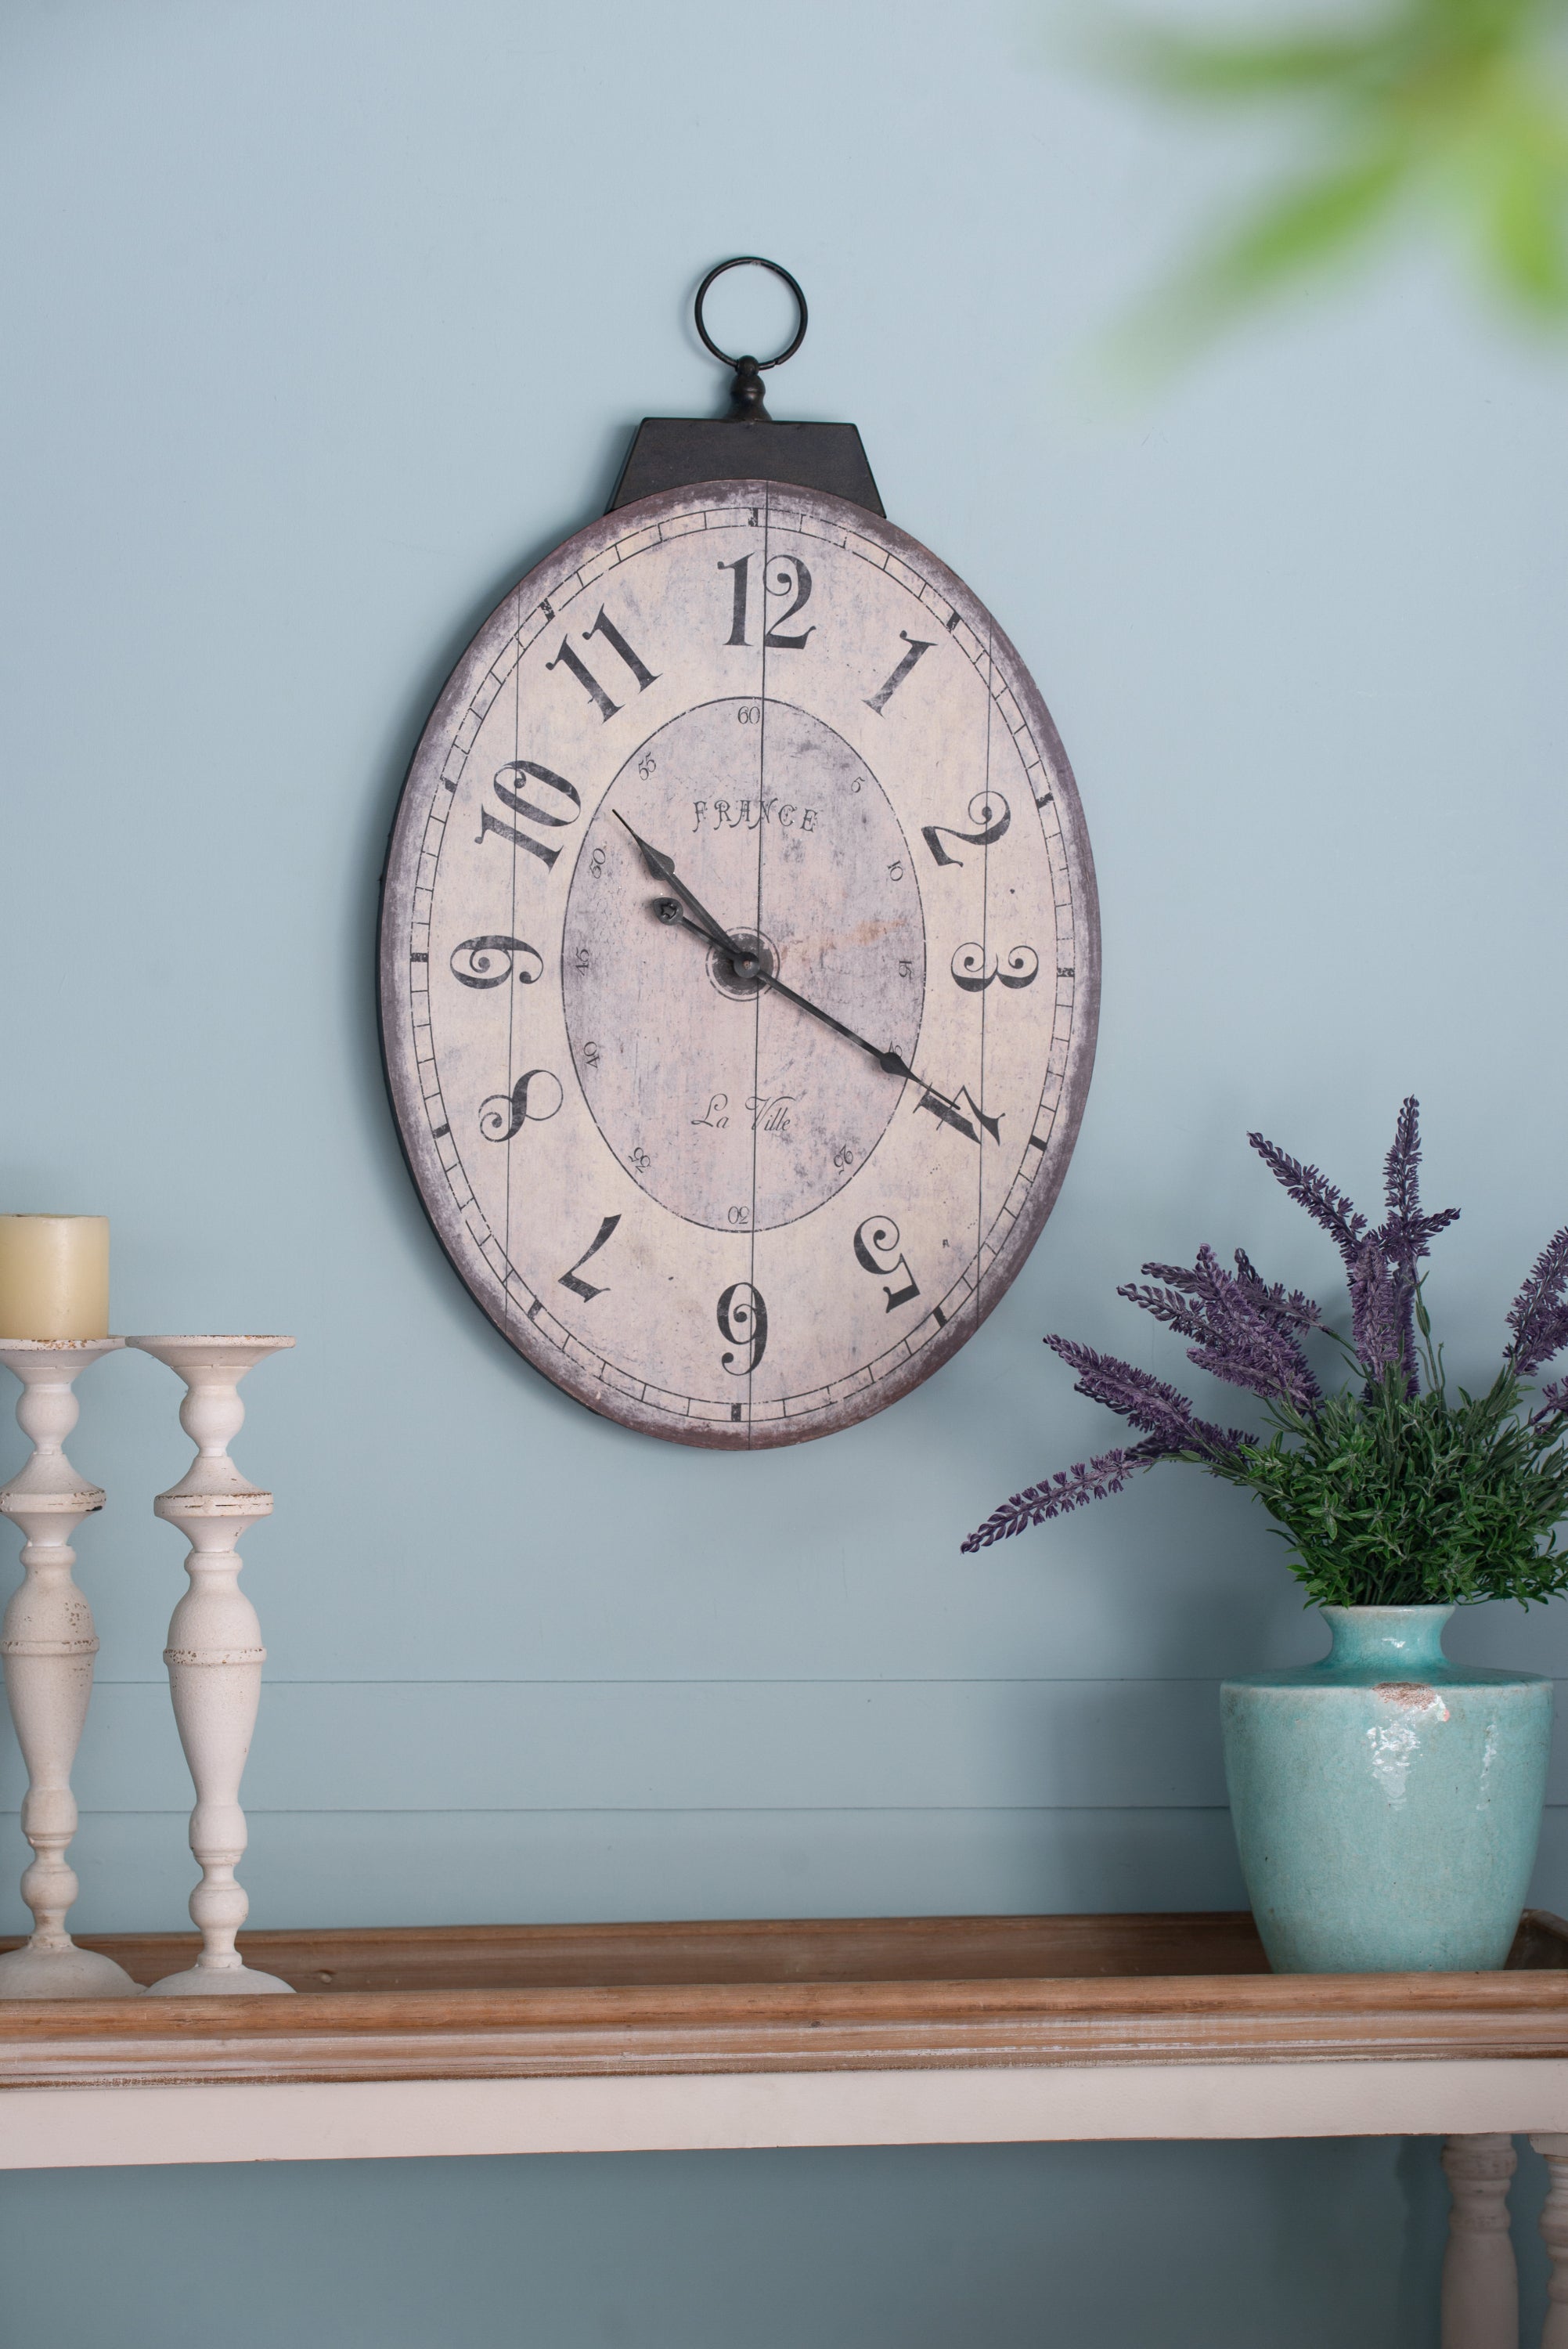 18"x29" Antique White Oval Wall Clock, Traditional Vintage Home Decor Clock